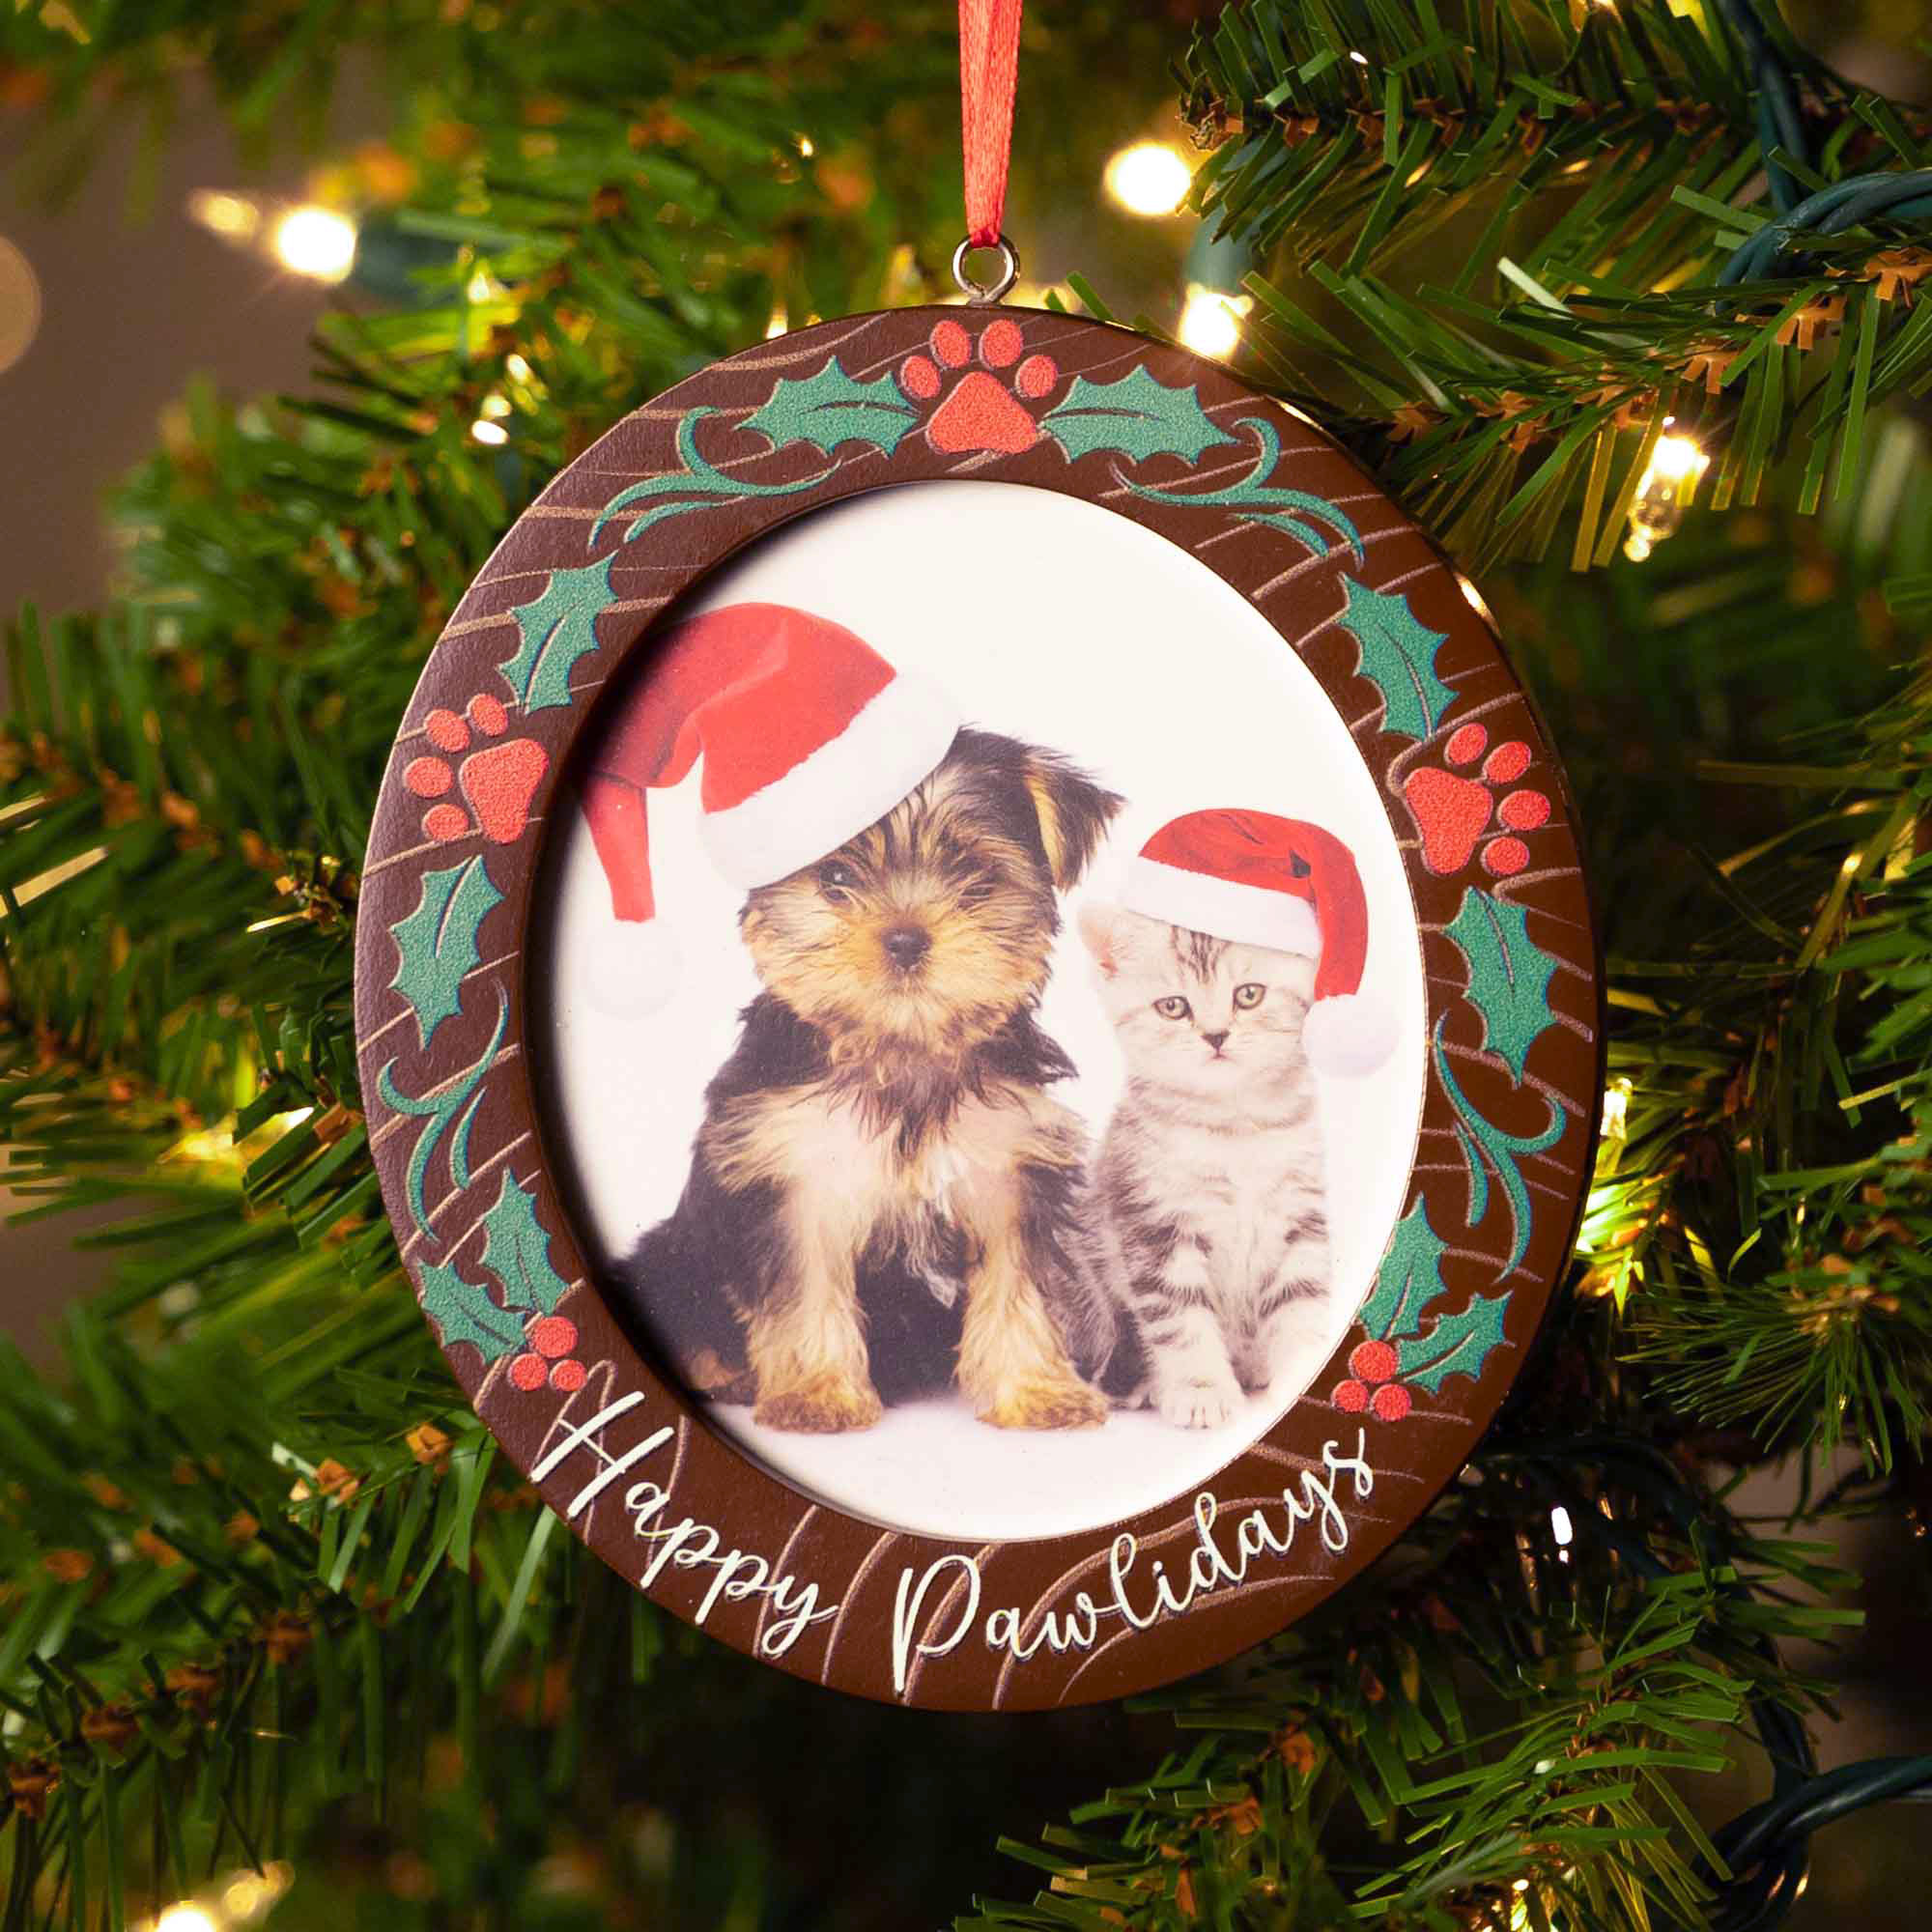 Image of Happy Pawlidays Frame Ornament - Early Black Friday Deal $1.98 ( Limit 1 per customer)